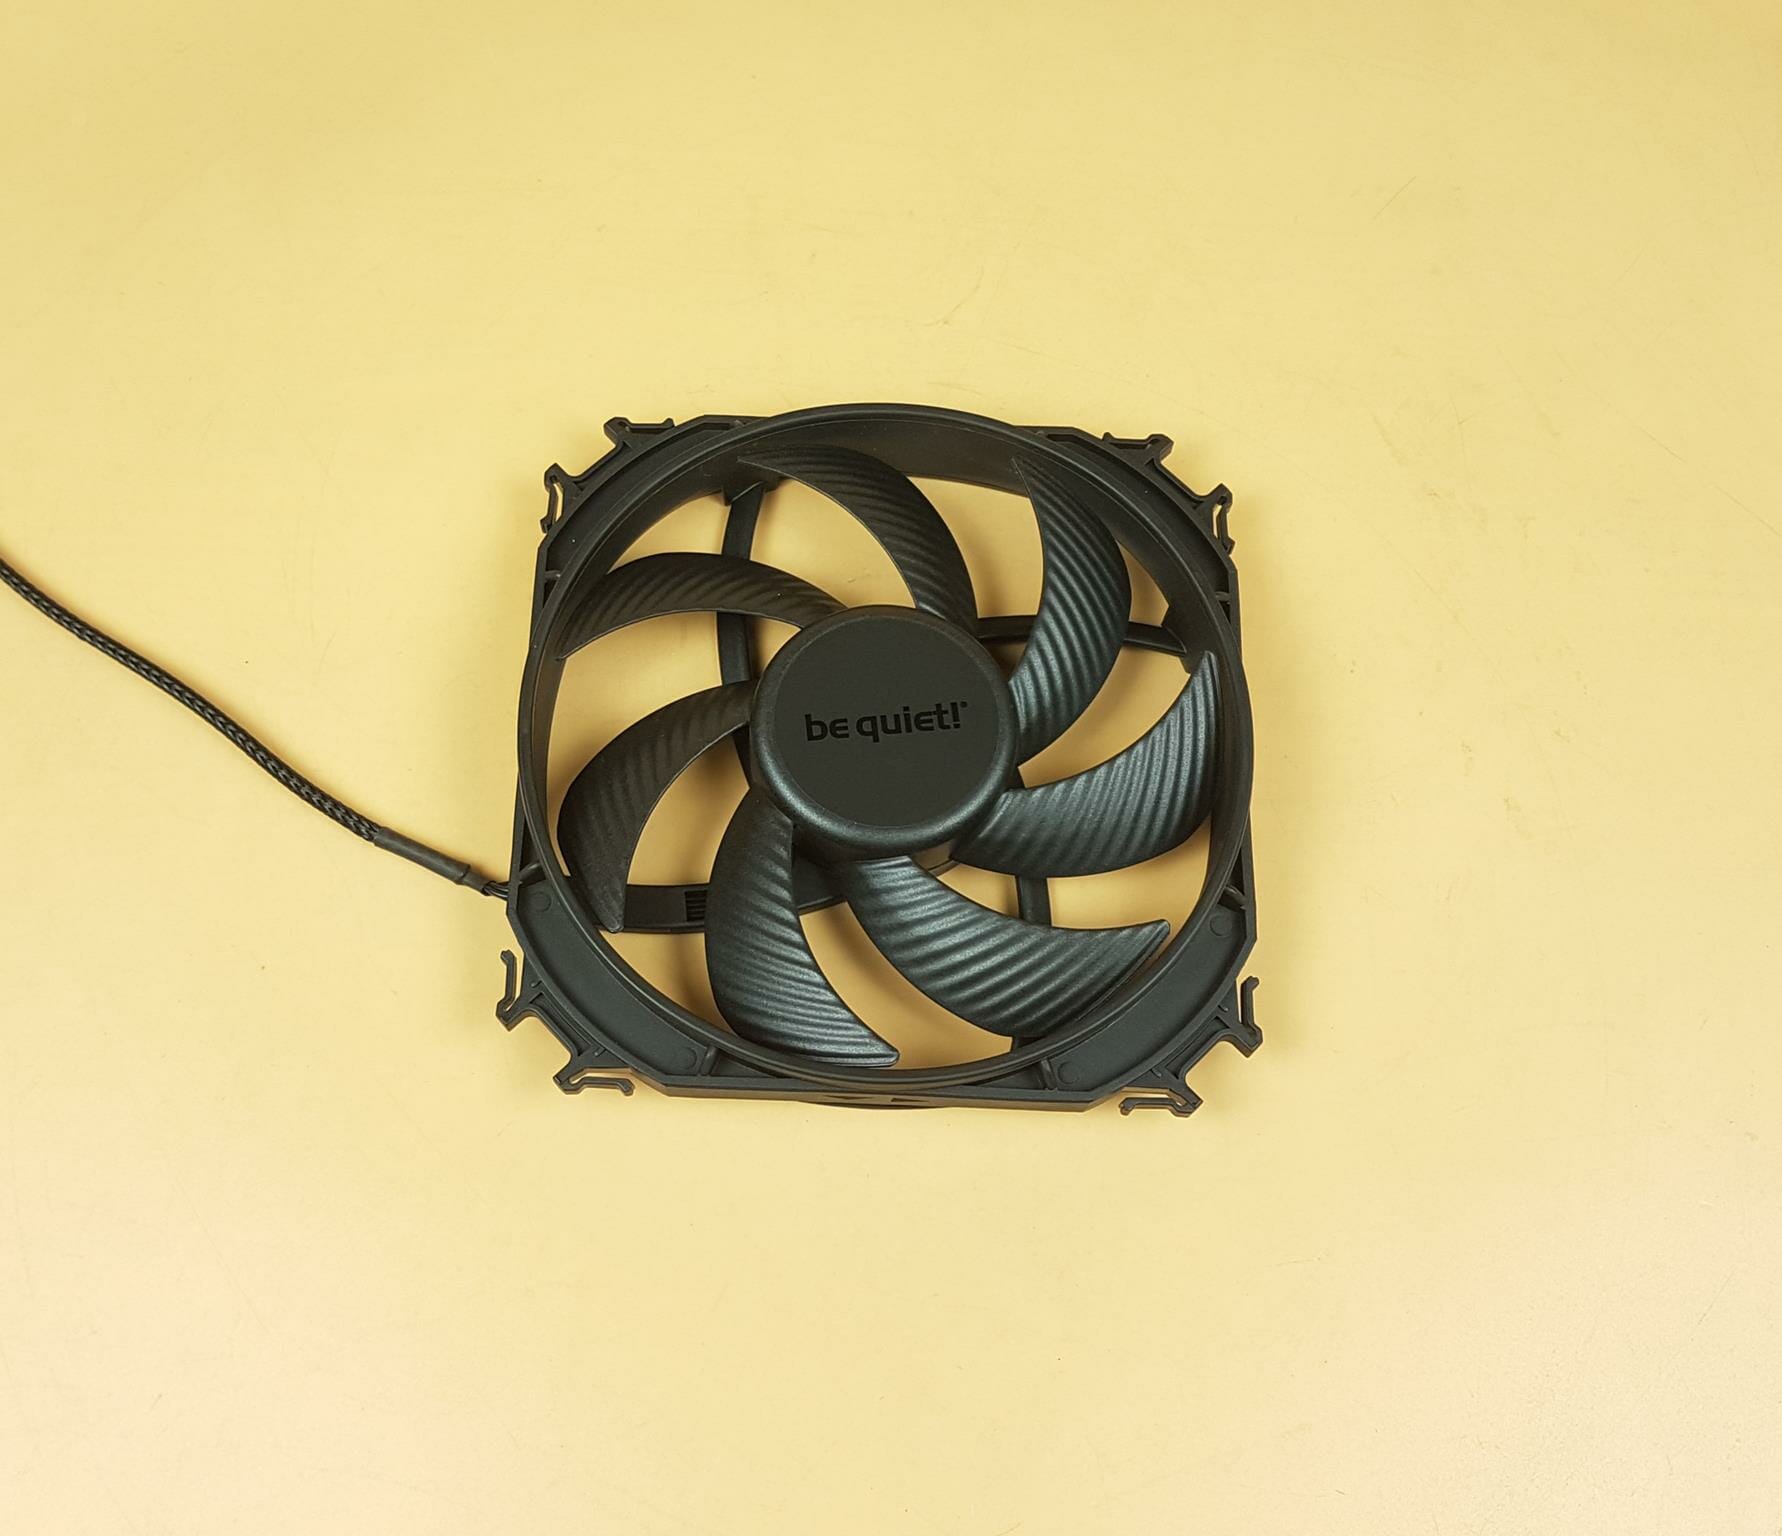 be quiet! Silent Wings 4 140mm PWM High-Speed Fans Review